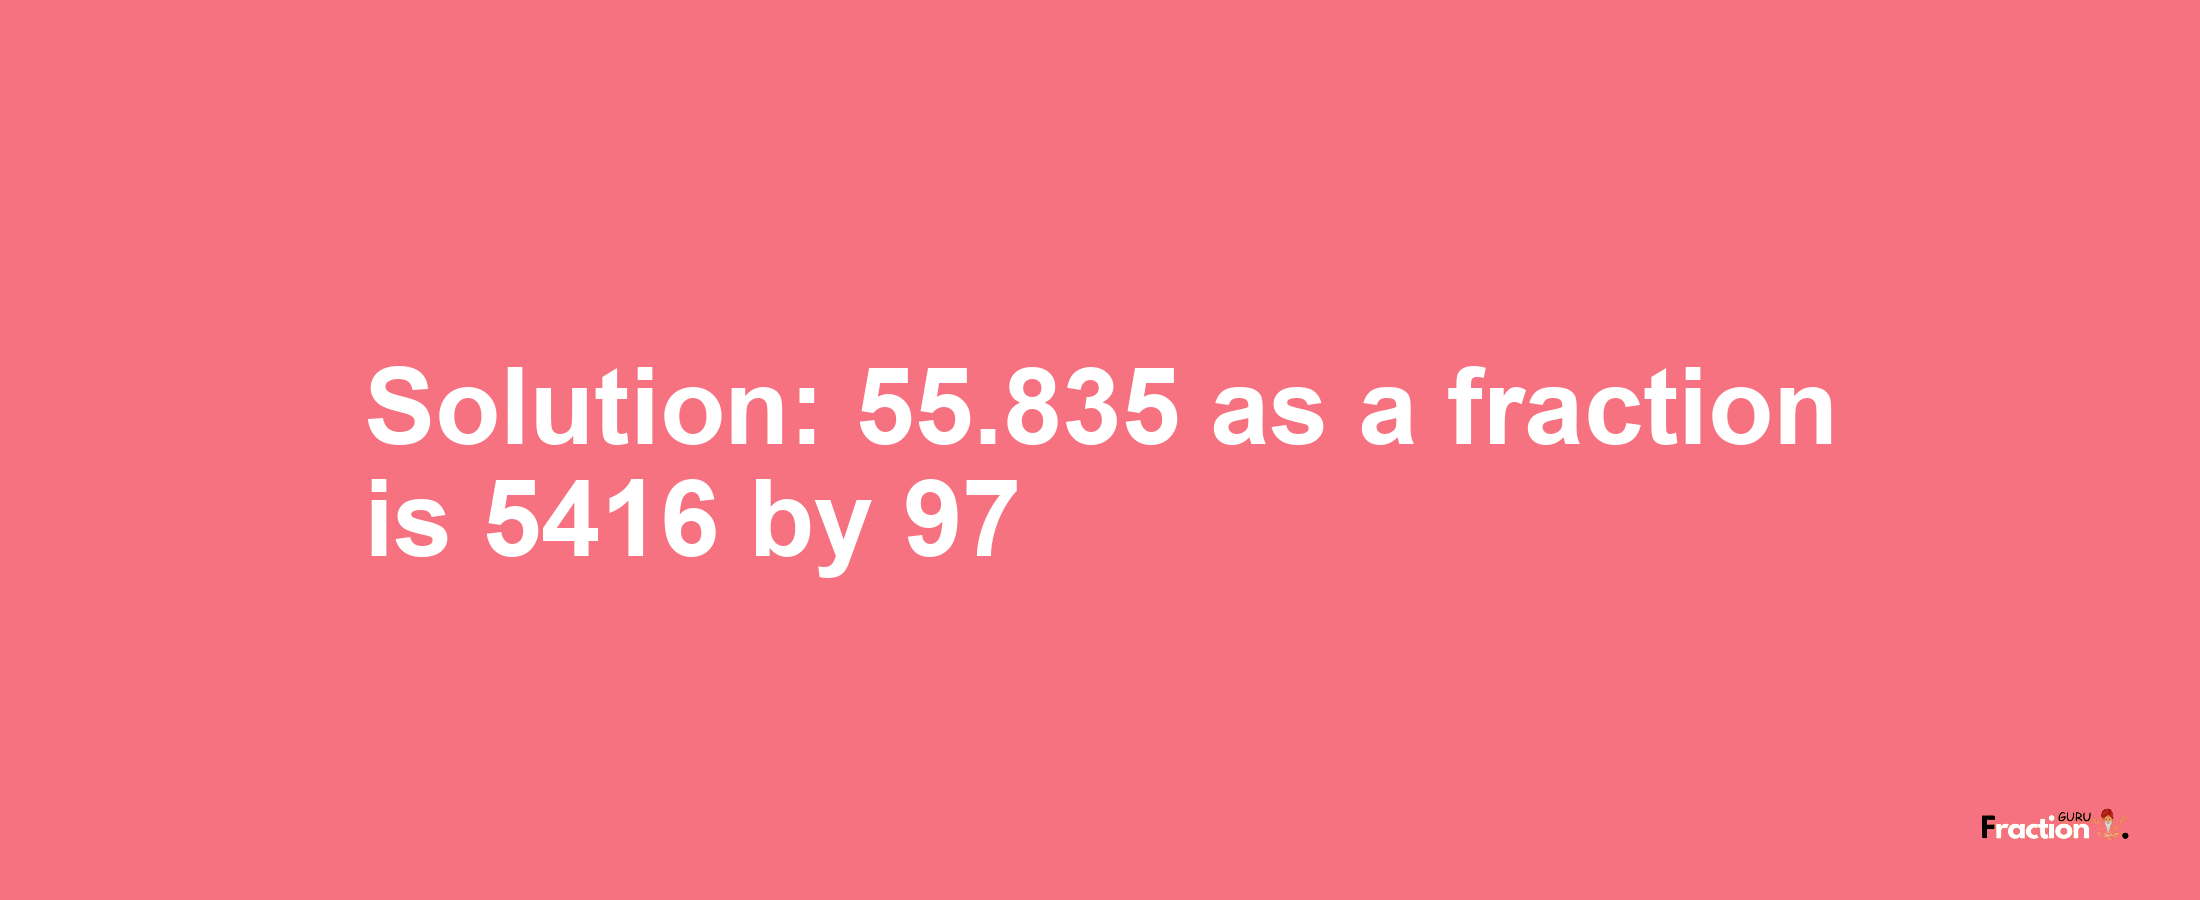 Solution:55.835 as a fraction is 5416/97